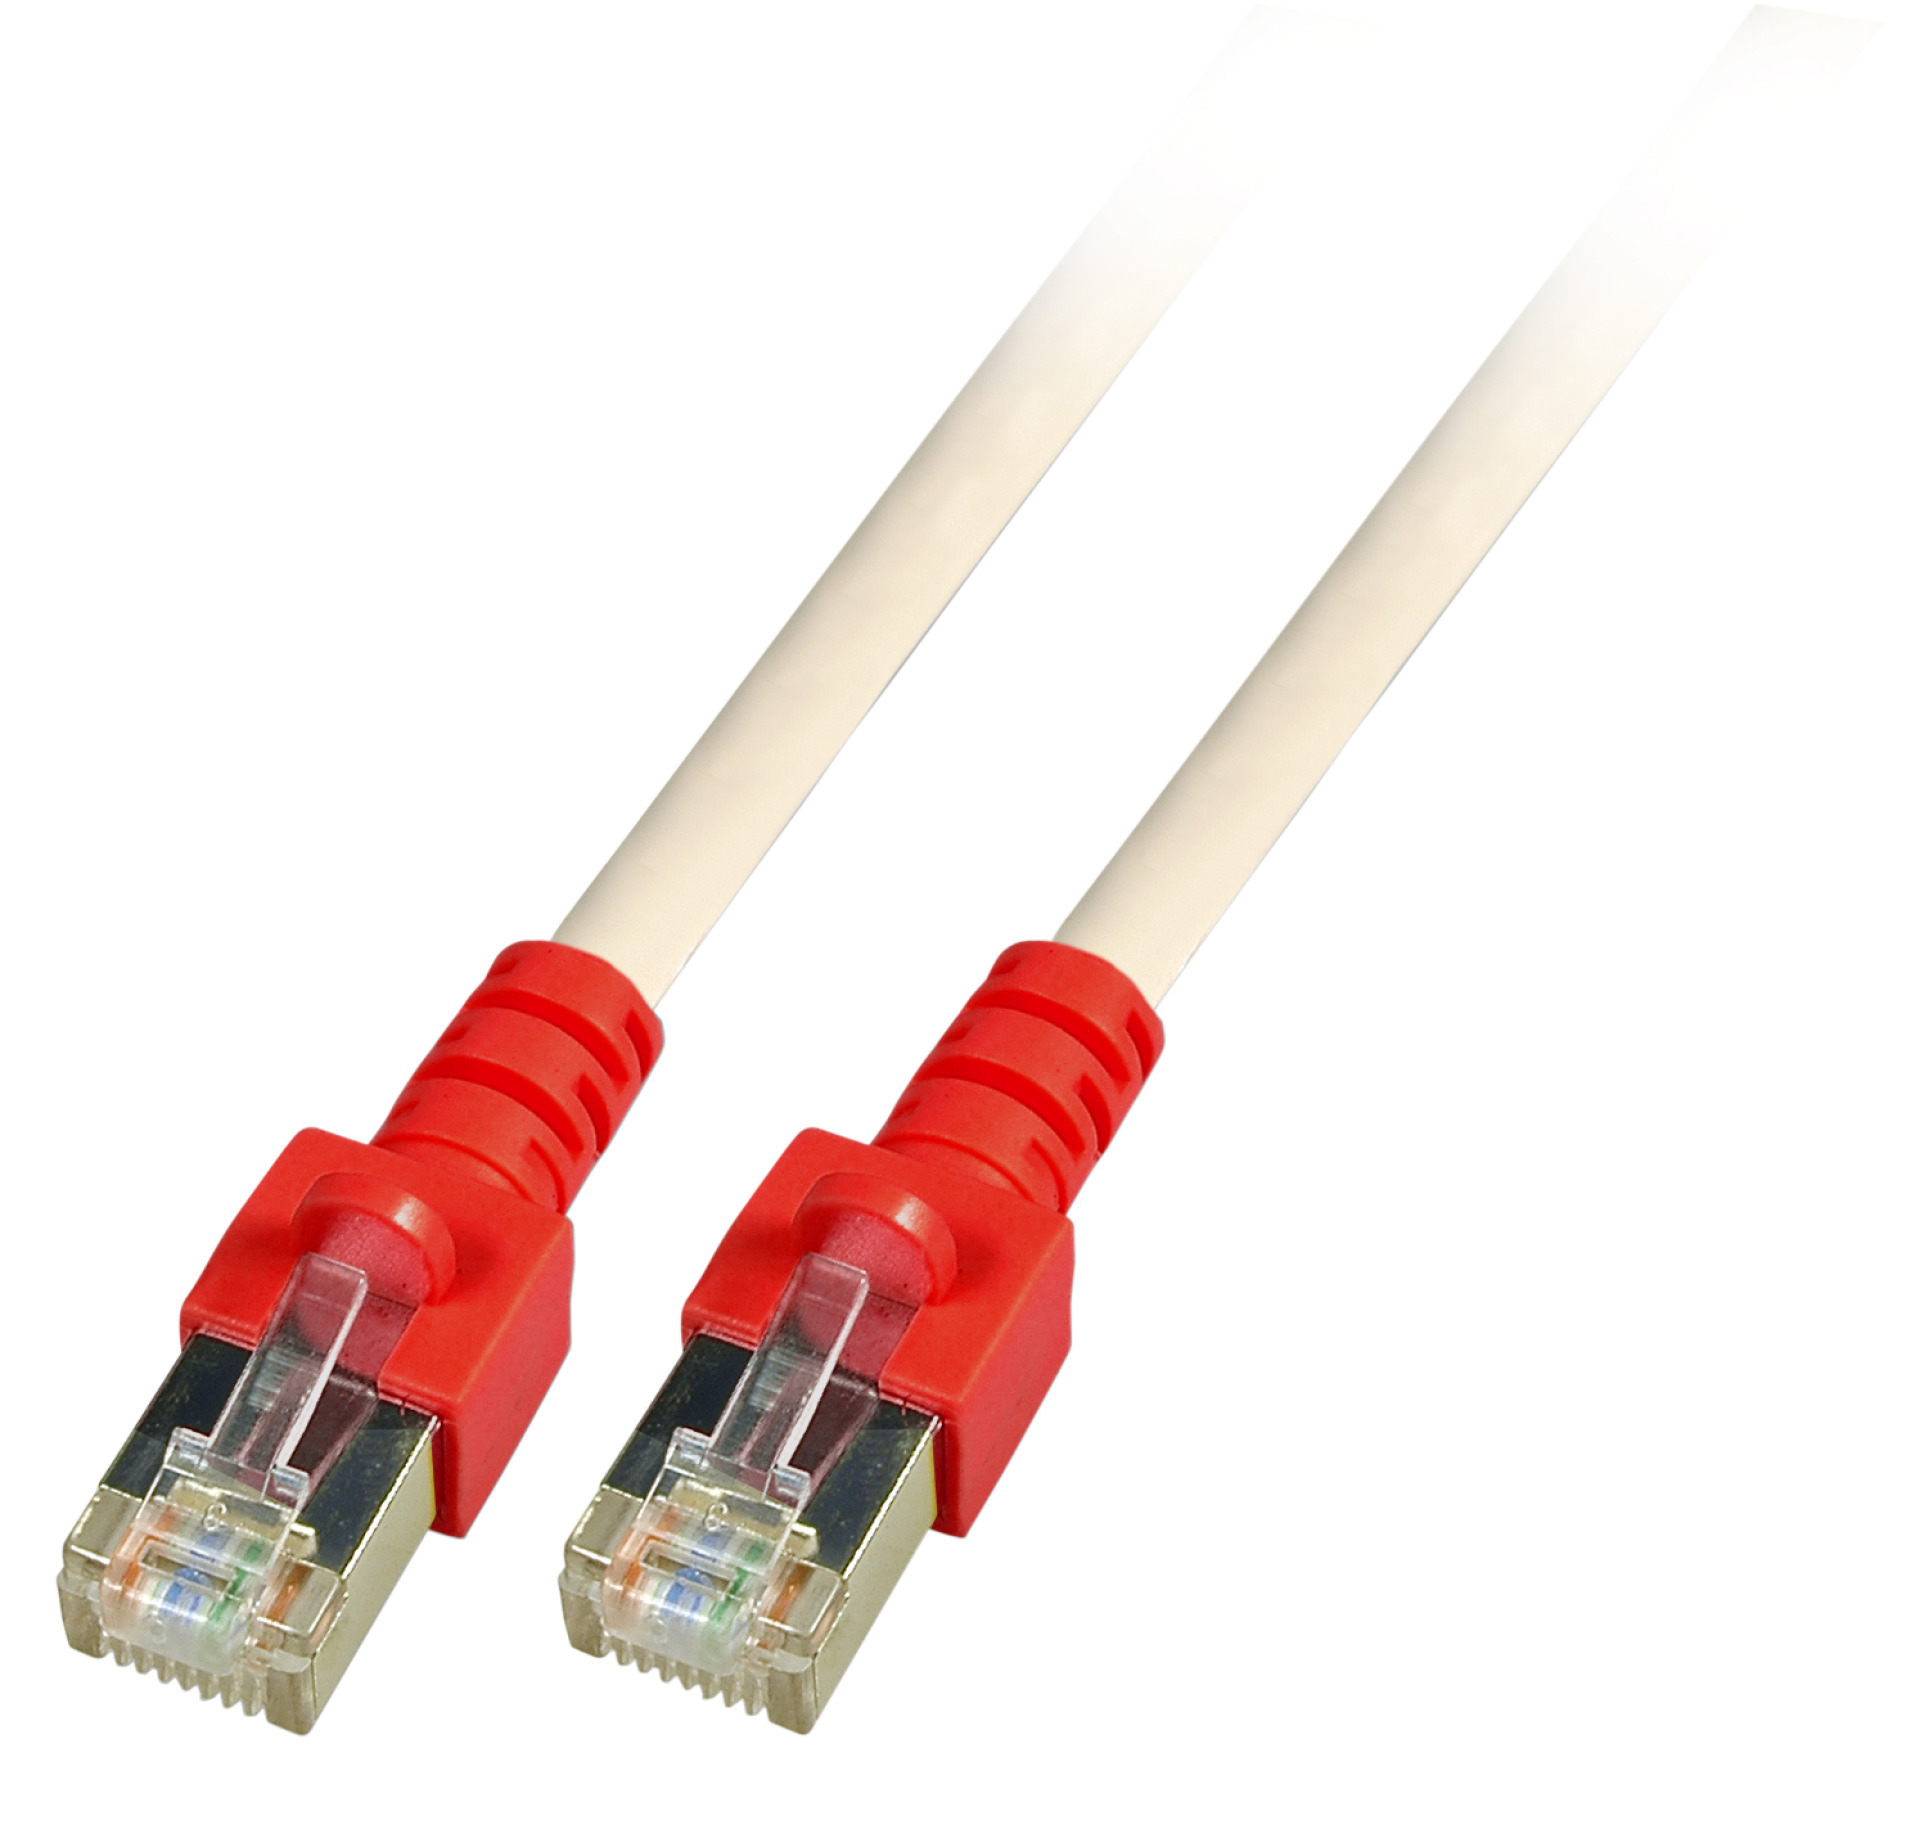 RJ45 Crossover Patch cable SF/UTP, Cat.5e, CCA, 3m, grey (red boot)